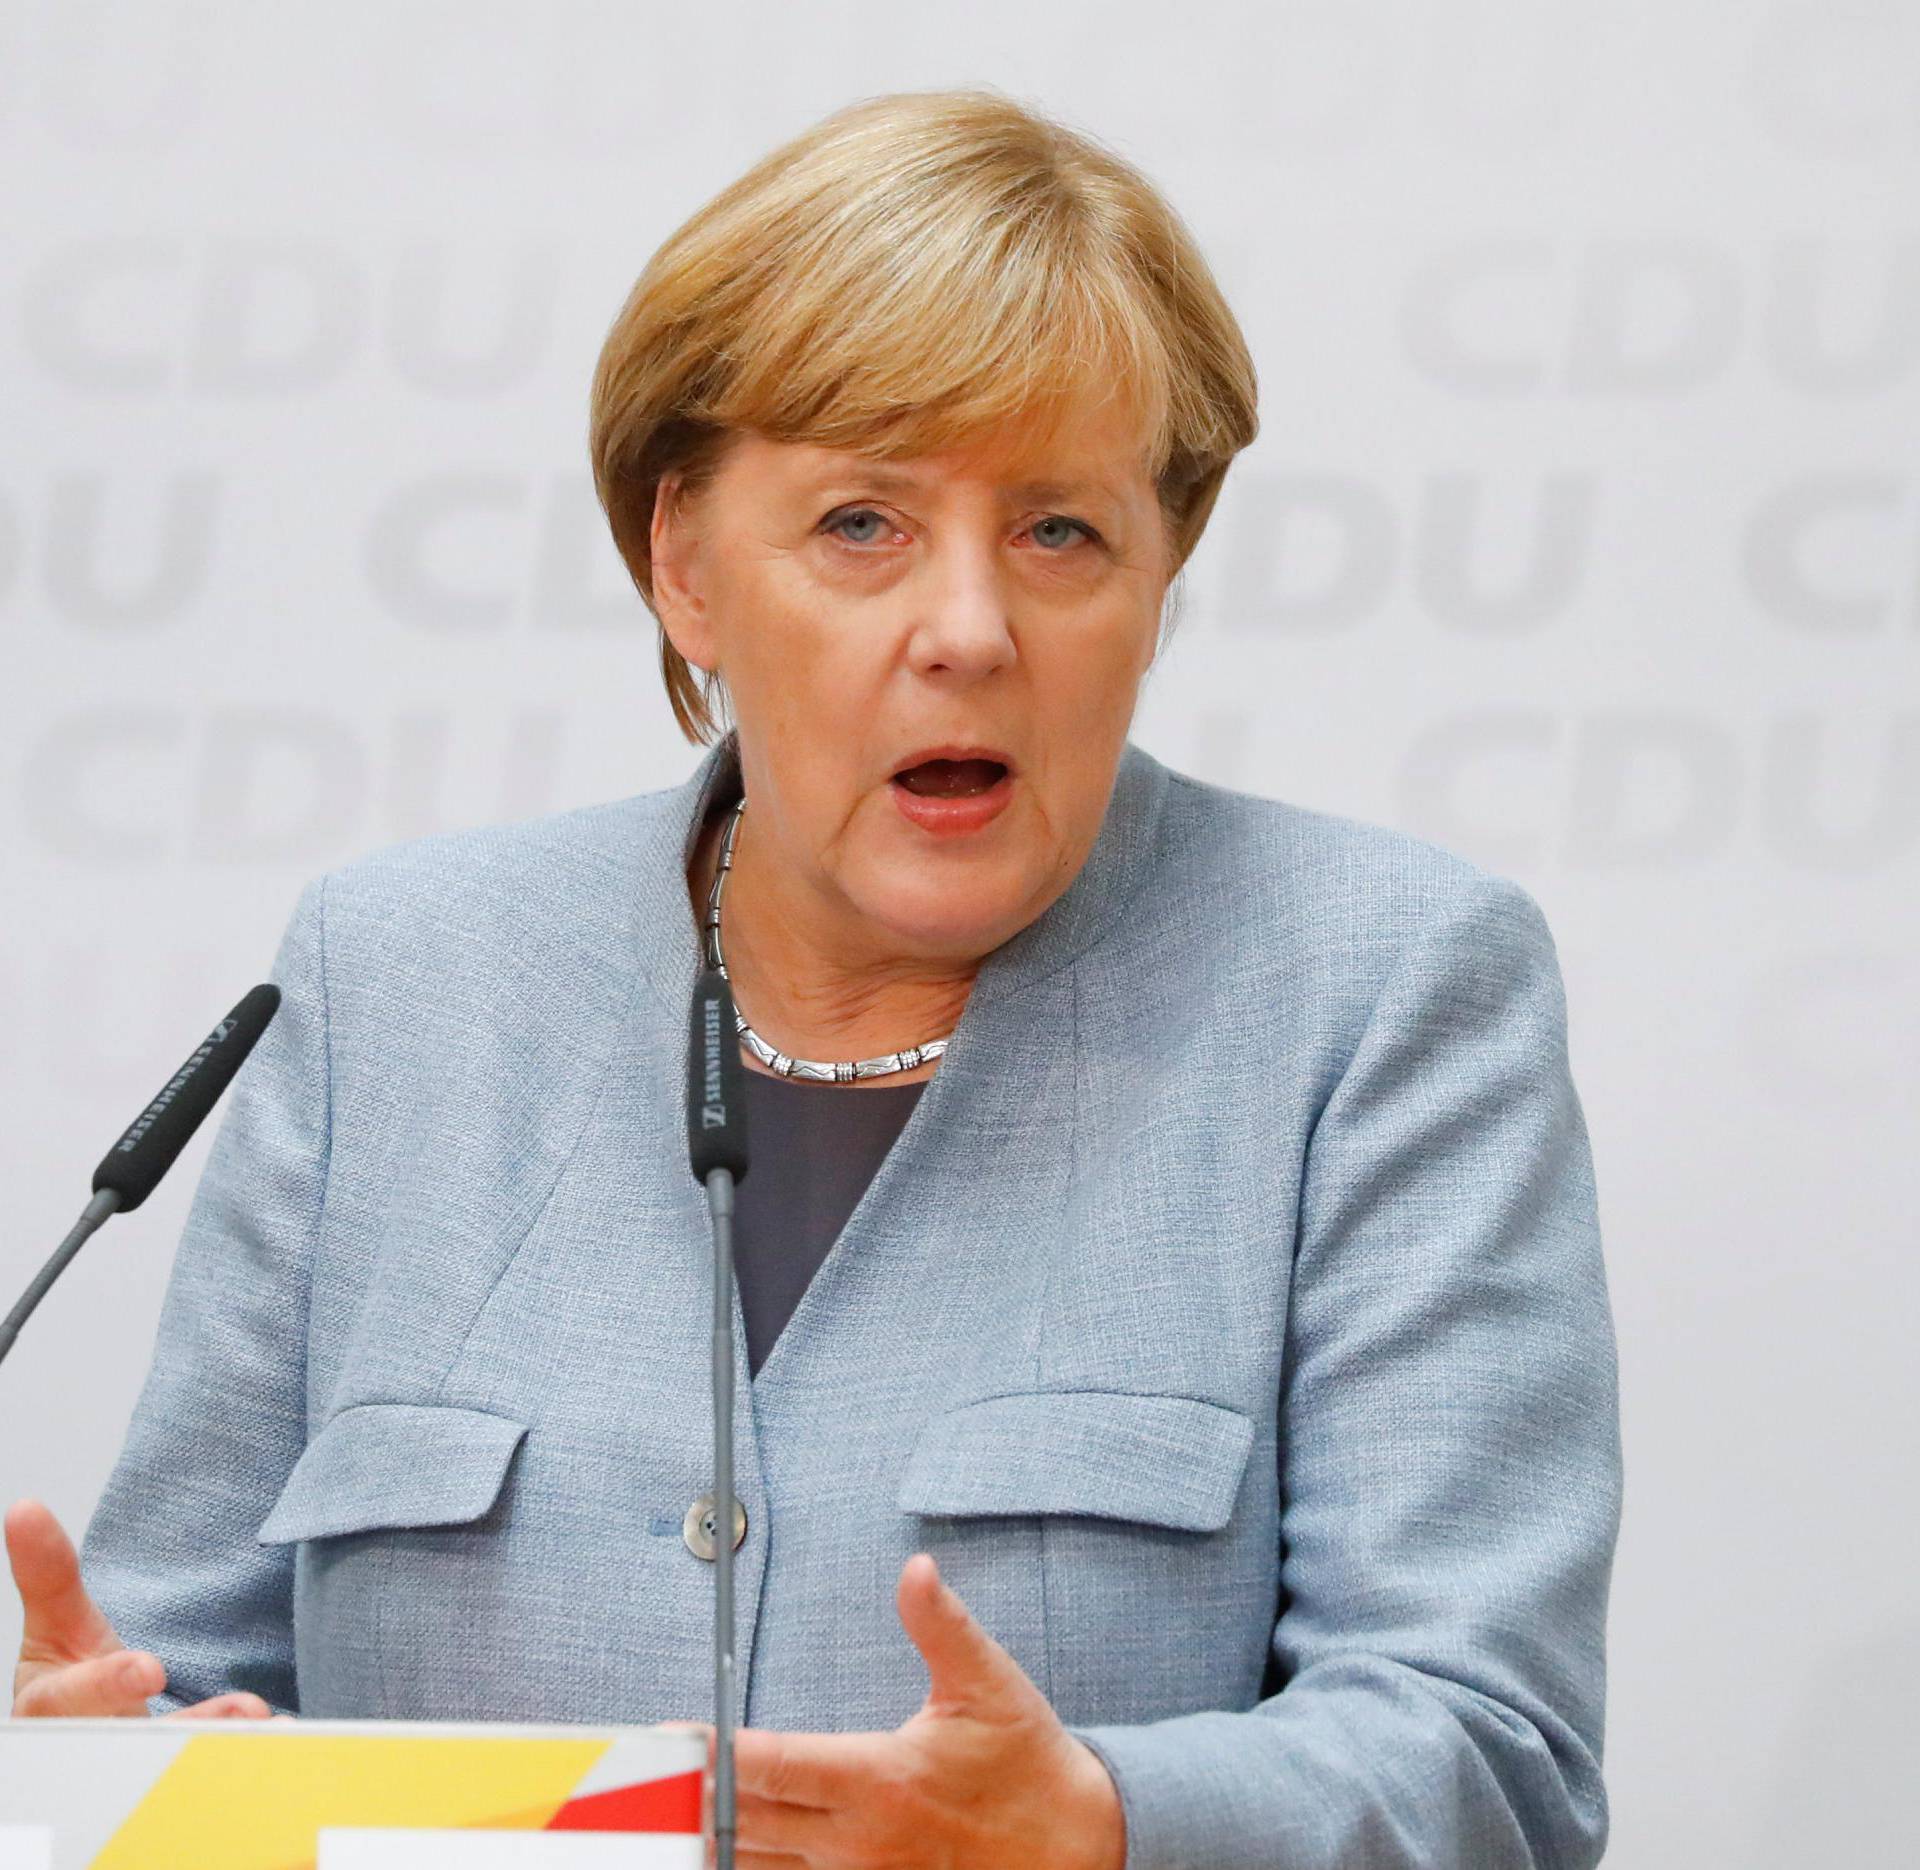 CDU news conference with Christian Democratic Union CDU party leader and German Chancellor Angela Merkel